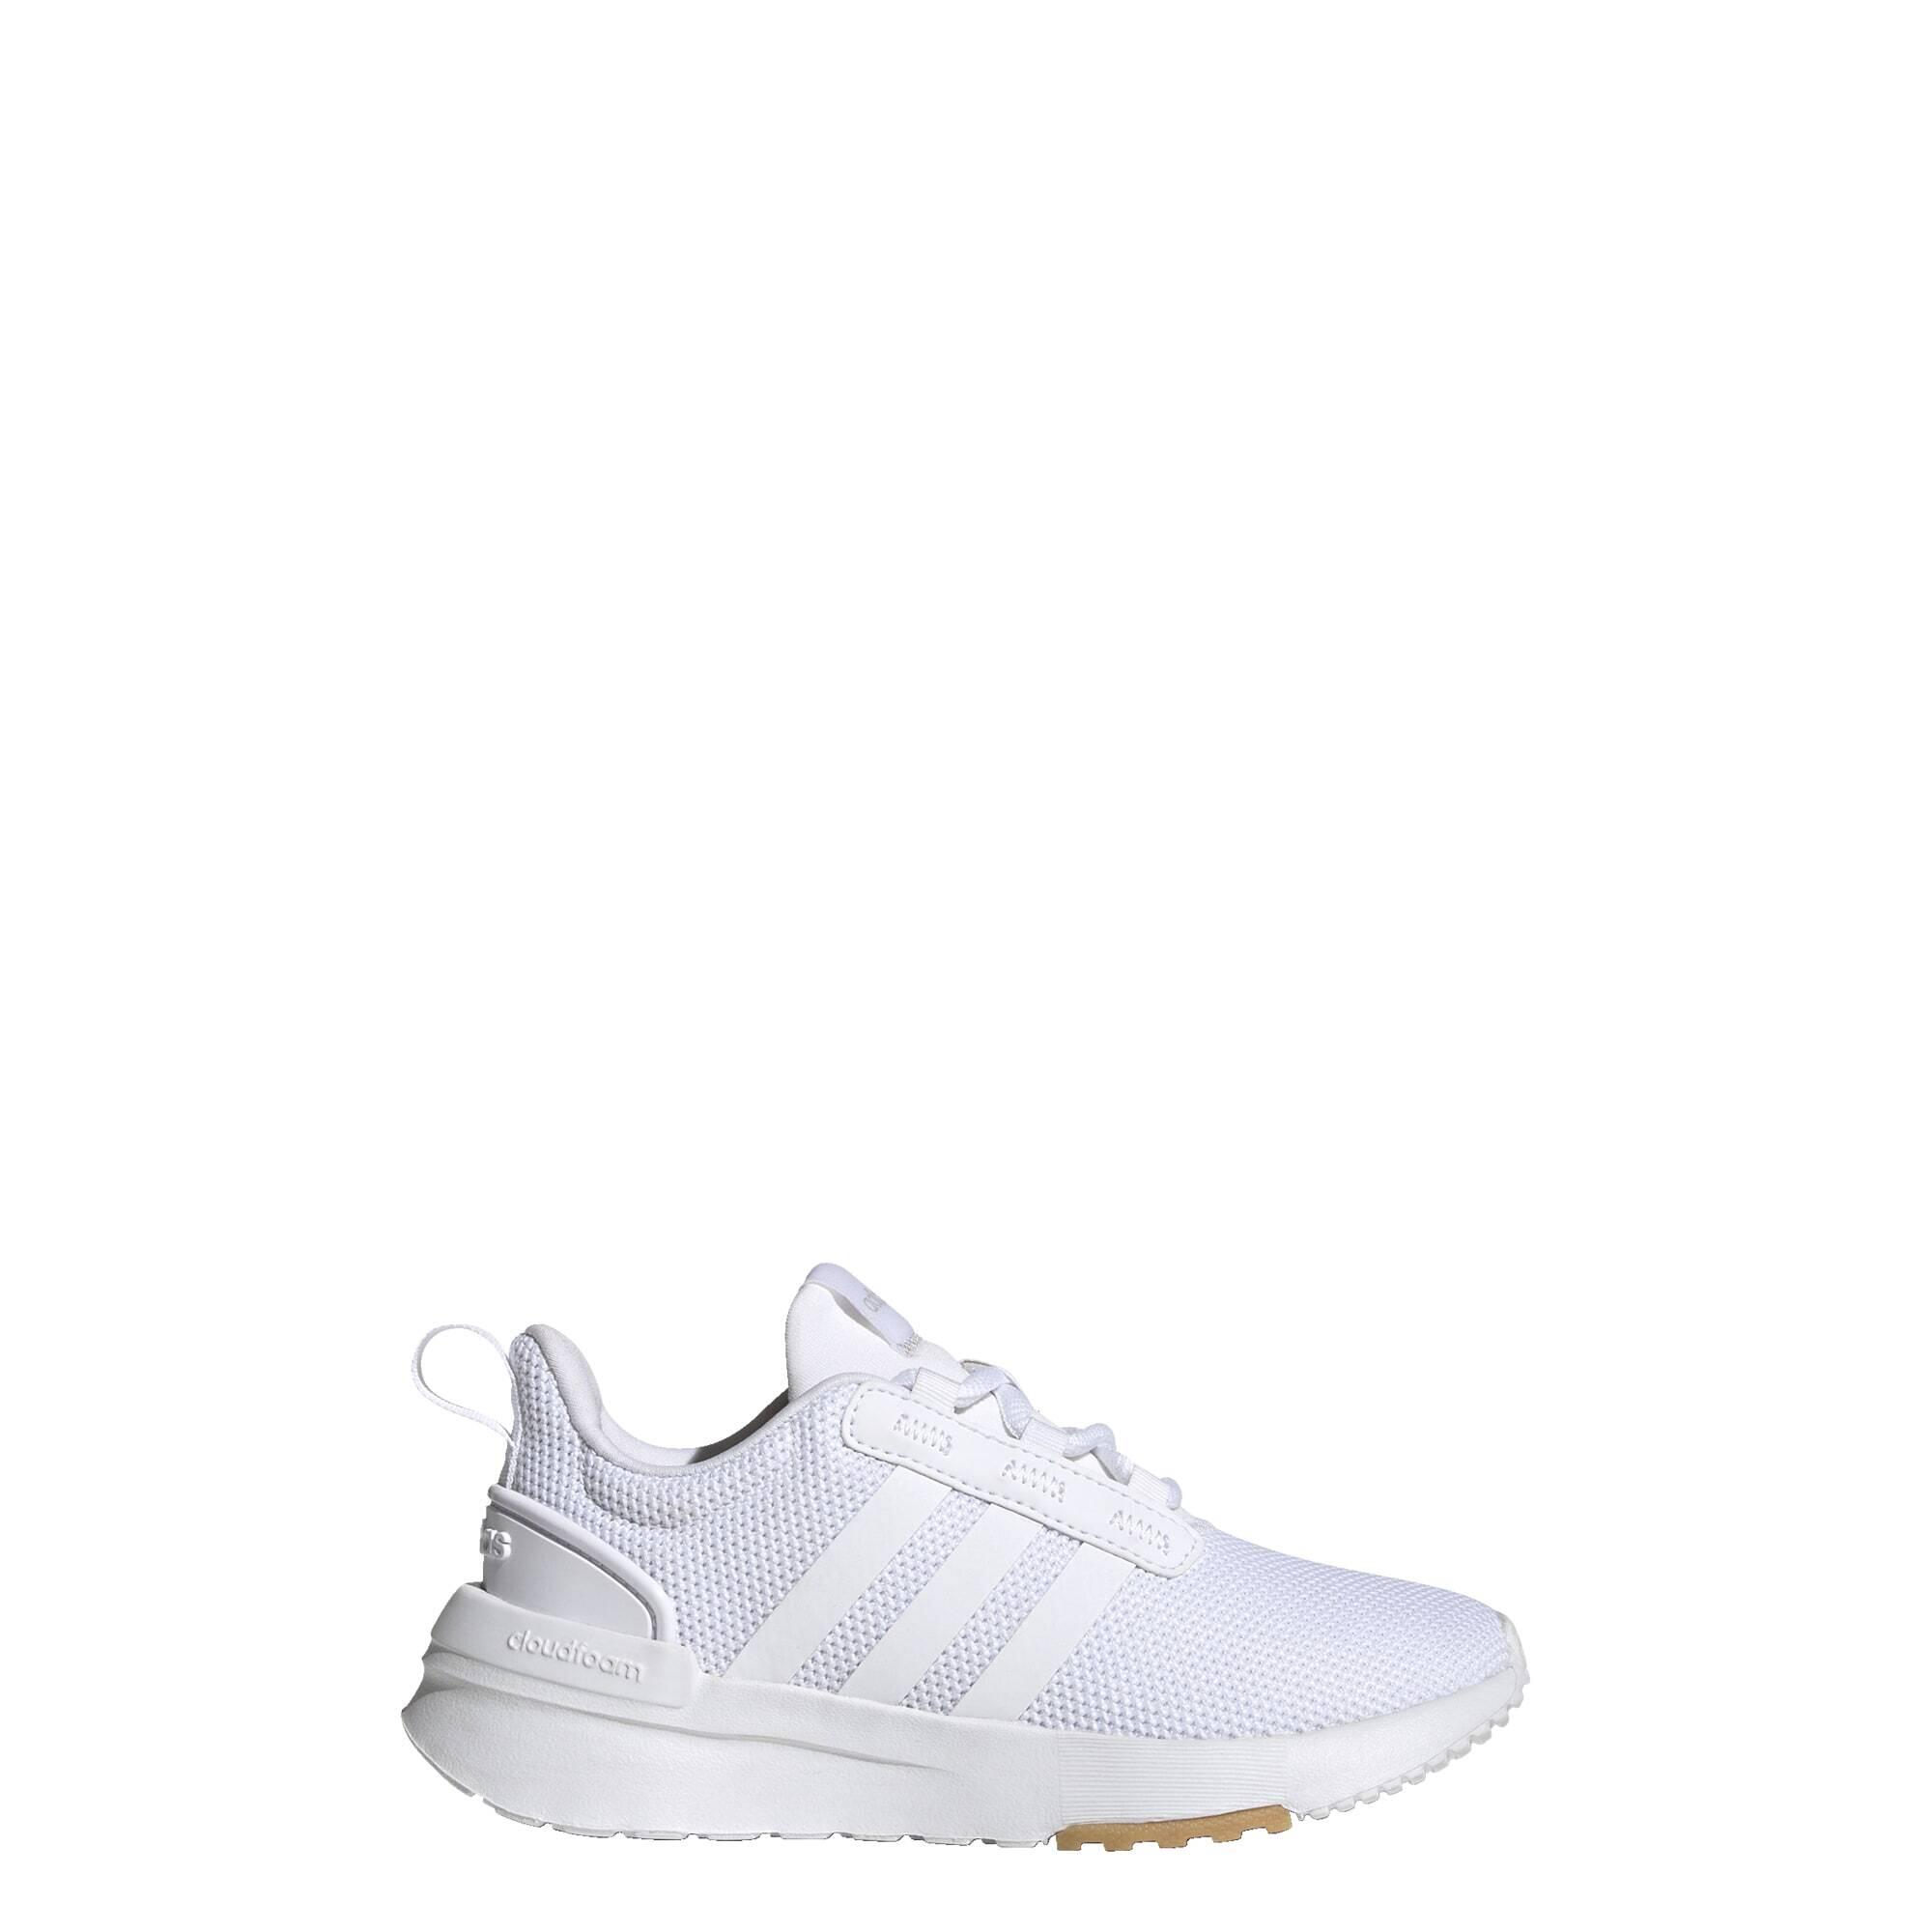 ADIDAS Racer TR21 Shoes